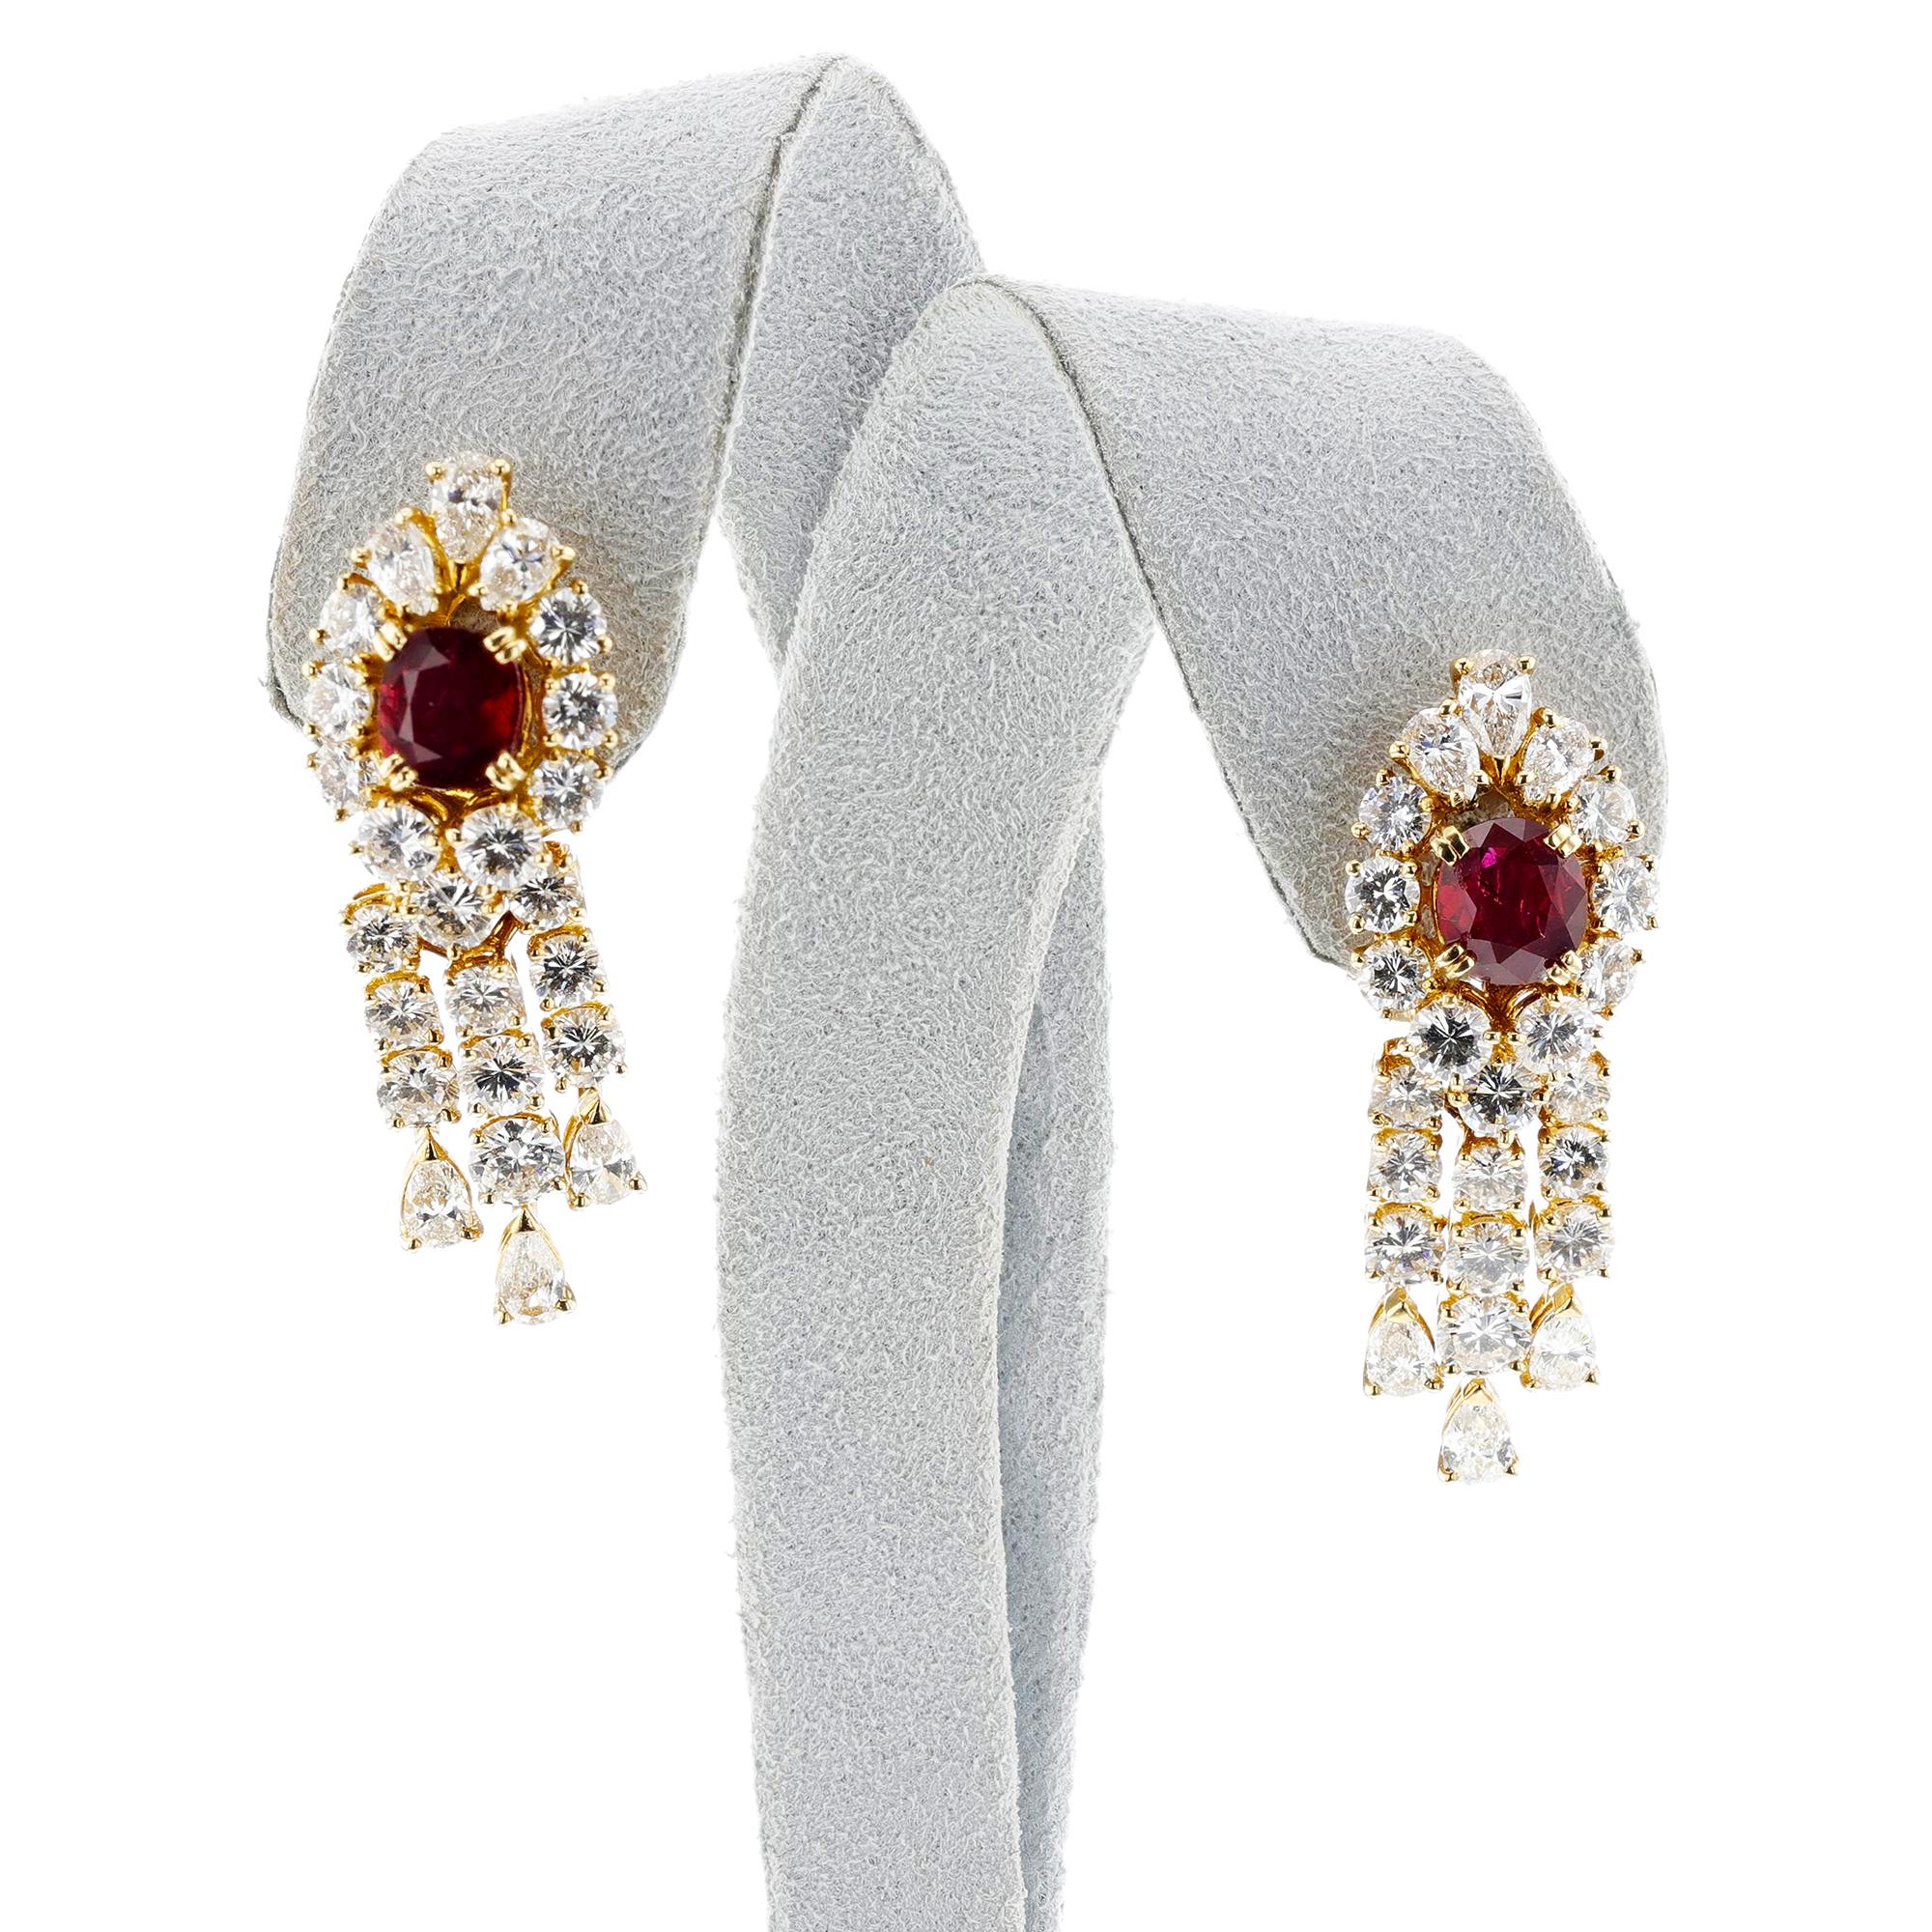 These Boucheron Ruby and Diamond Day & Night Earrings are crafted with 18k gold and exquisitely set with diamonds and natural rubies. The elegant design showcases a balance of modernity and timeless allure, perfect for any occasion. The luxury of